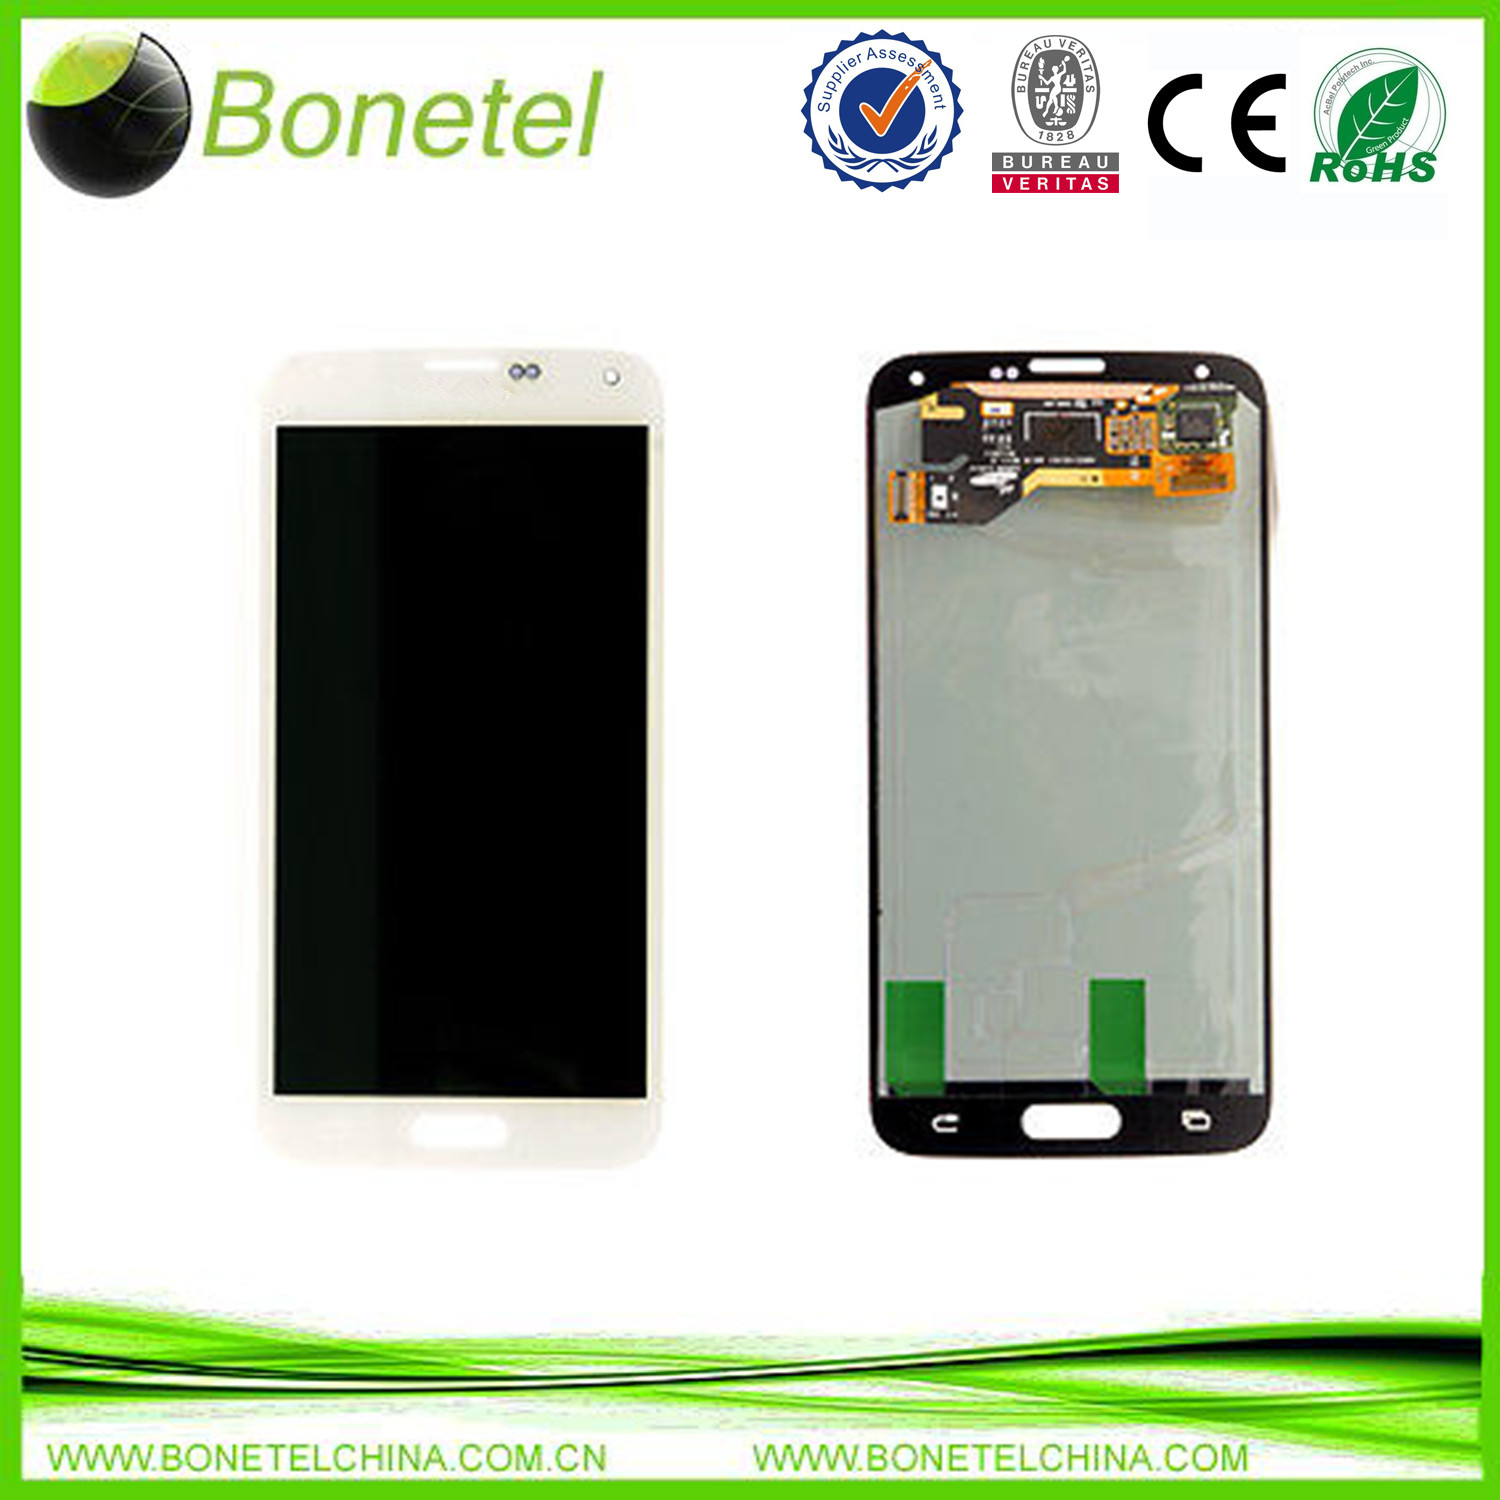 LCD Display Touch Screen Assembly Replacement for Samsung Galaxy S5 i9600